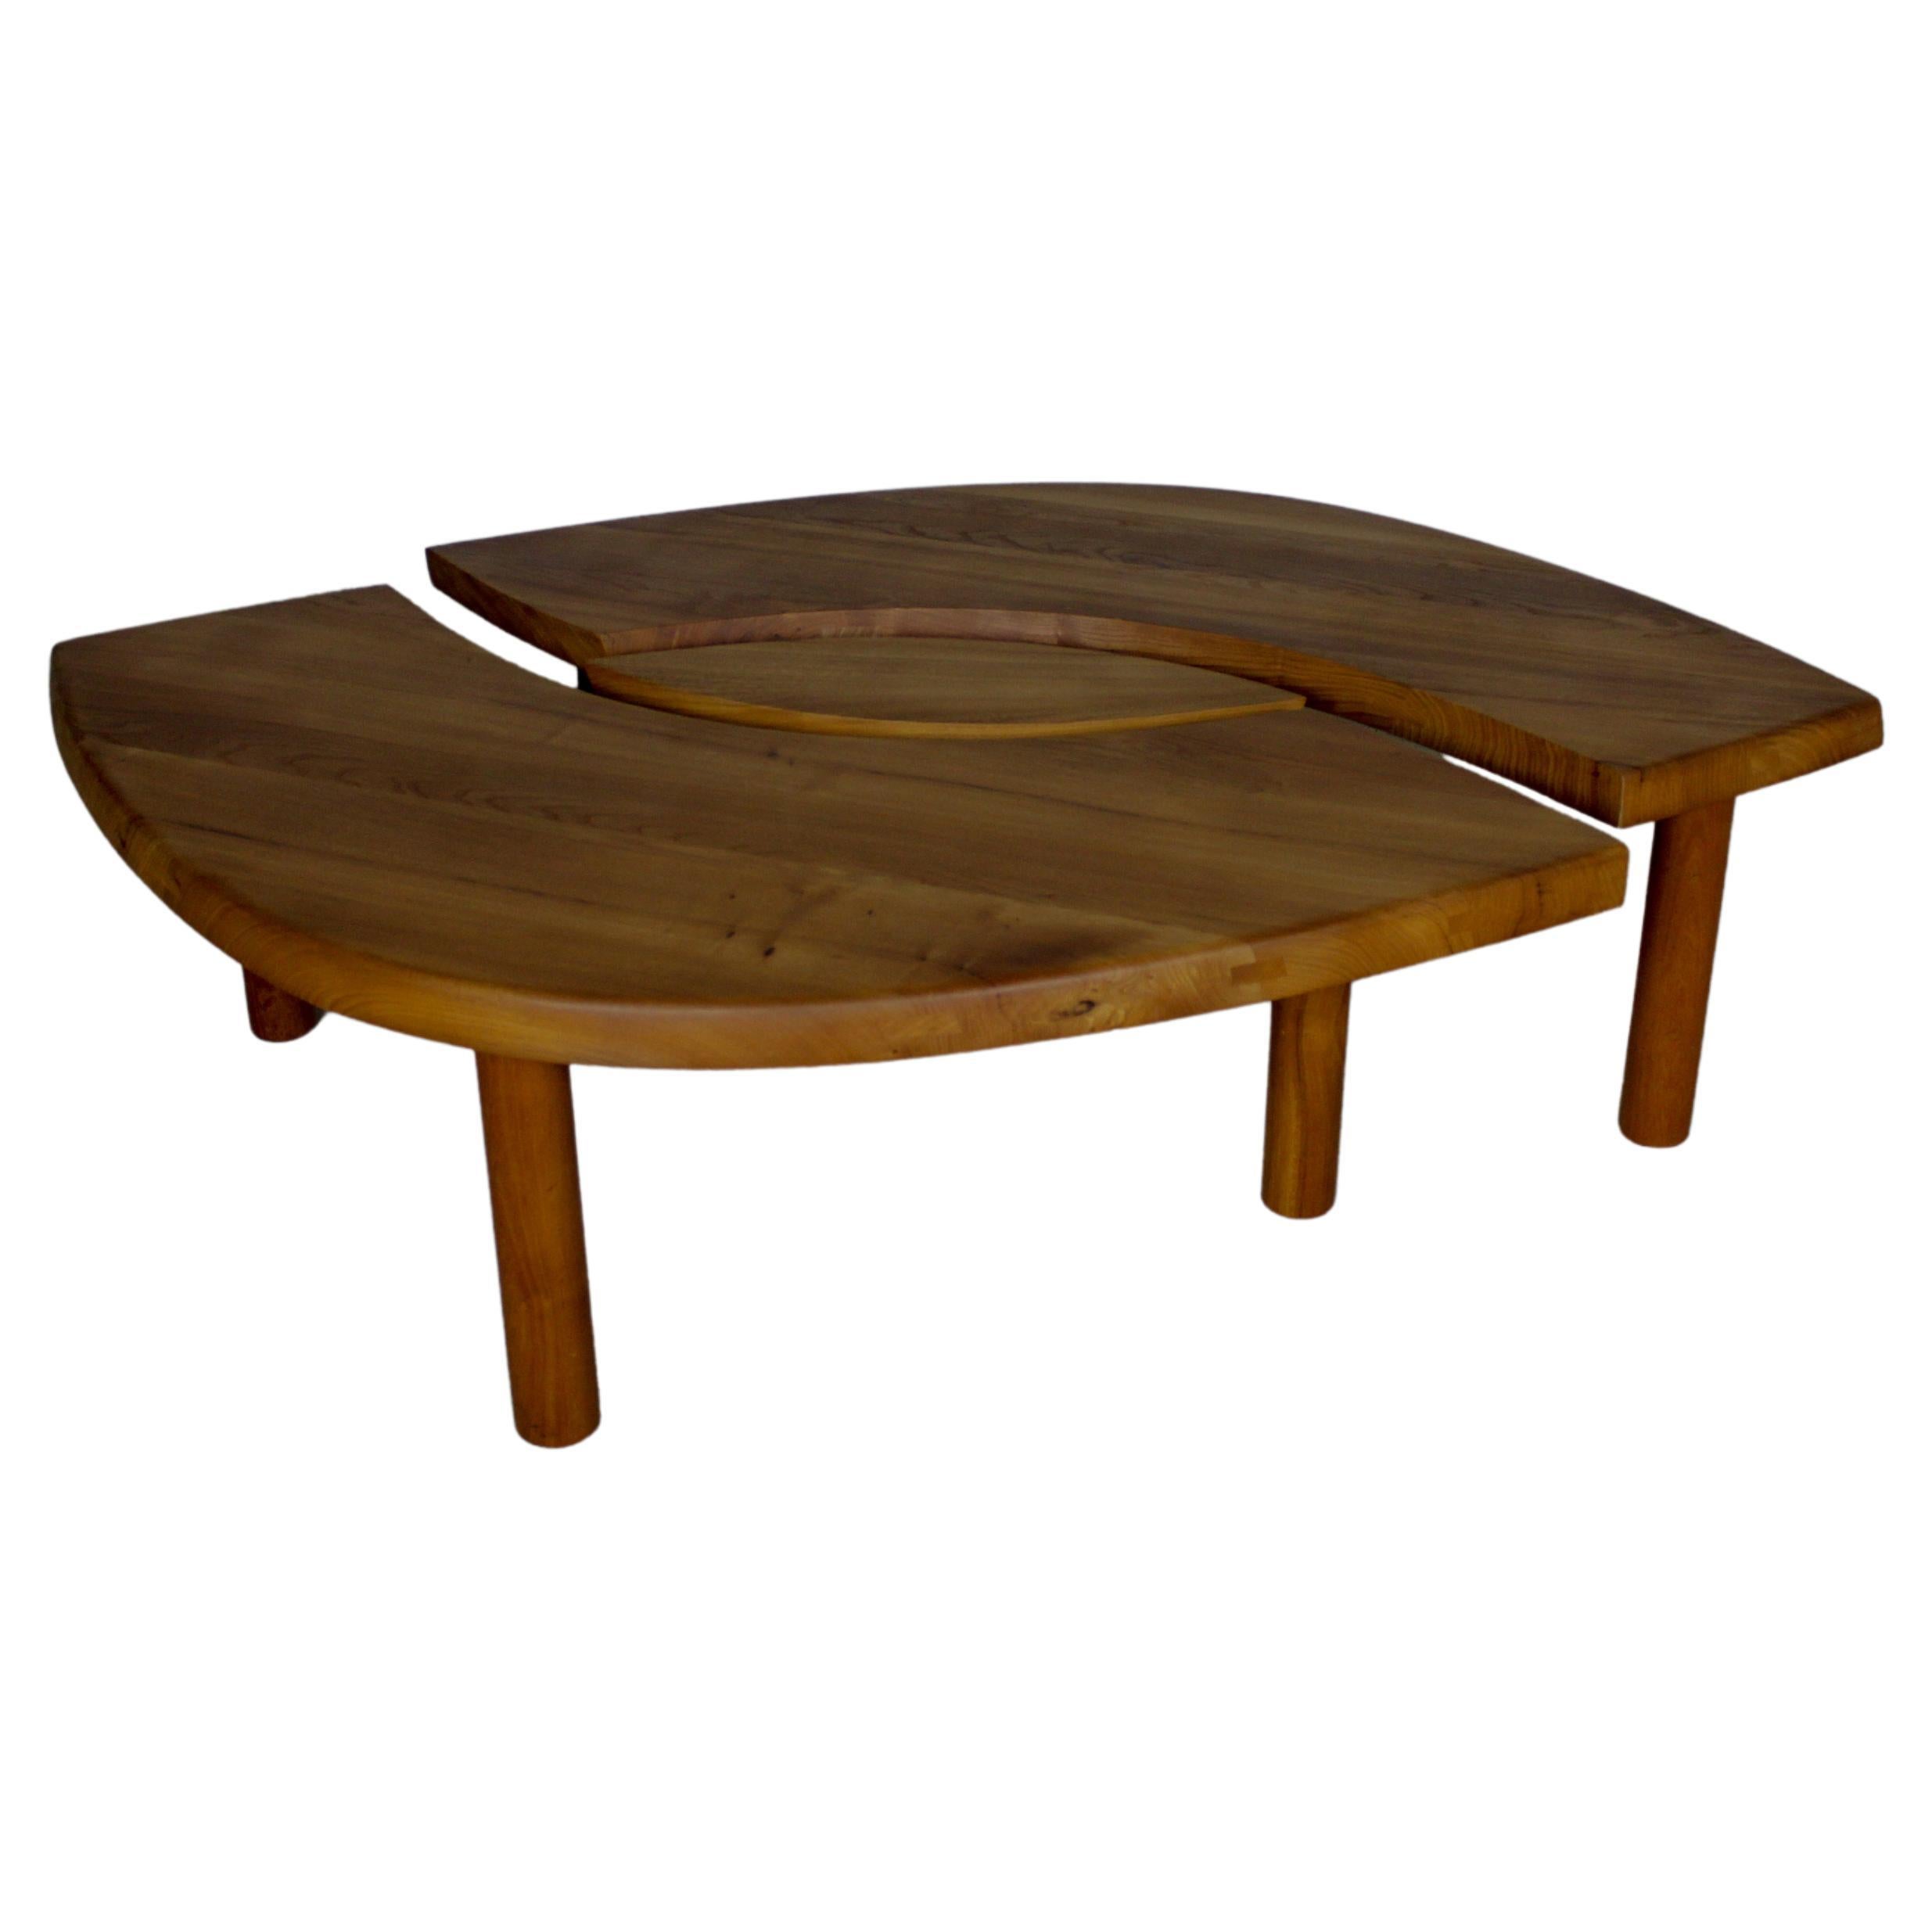 The Pierre Chapo coffee table stands as a masterpiece of mid-century modern design, embodying the essence of craftsmanship, functionality, and timeless elegance. Crafted by the French designer Pierre Chapo, this iconic piece exemplifies the marriage